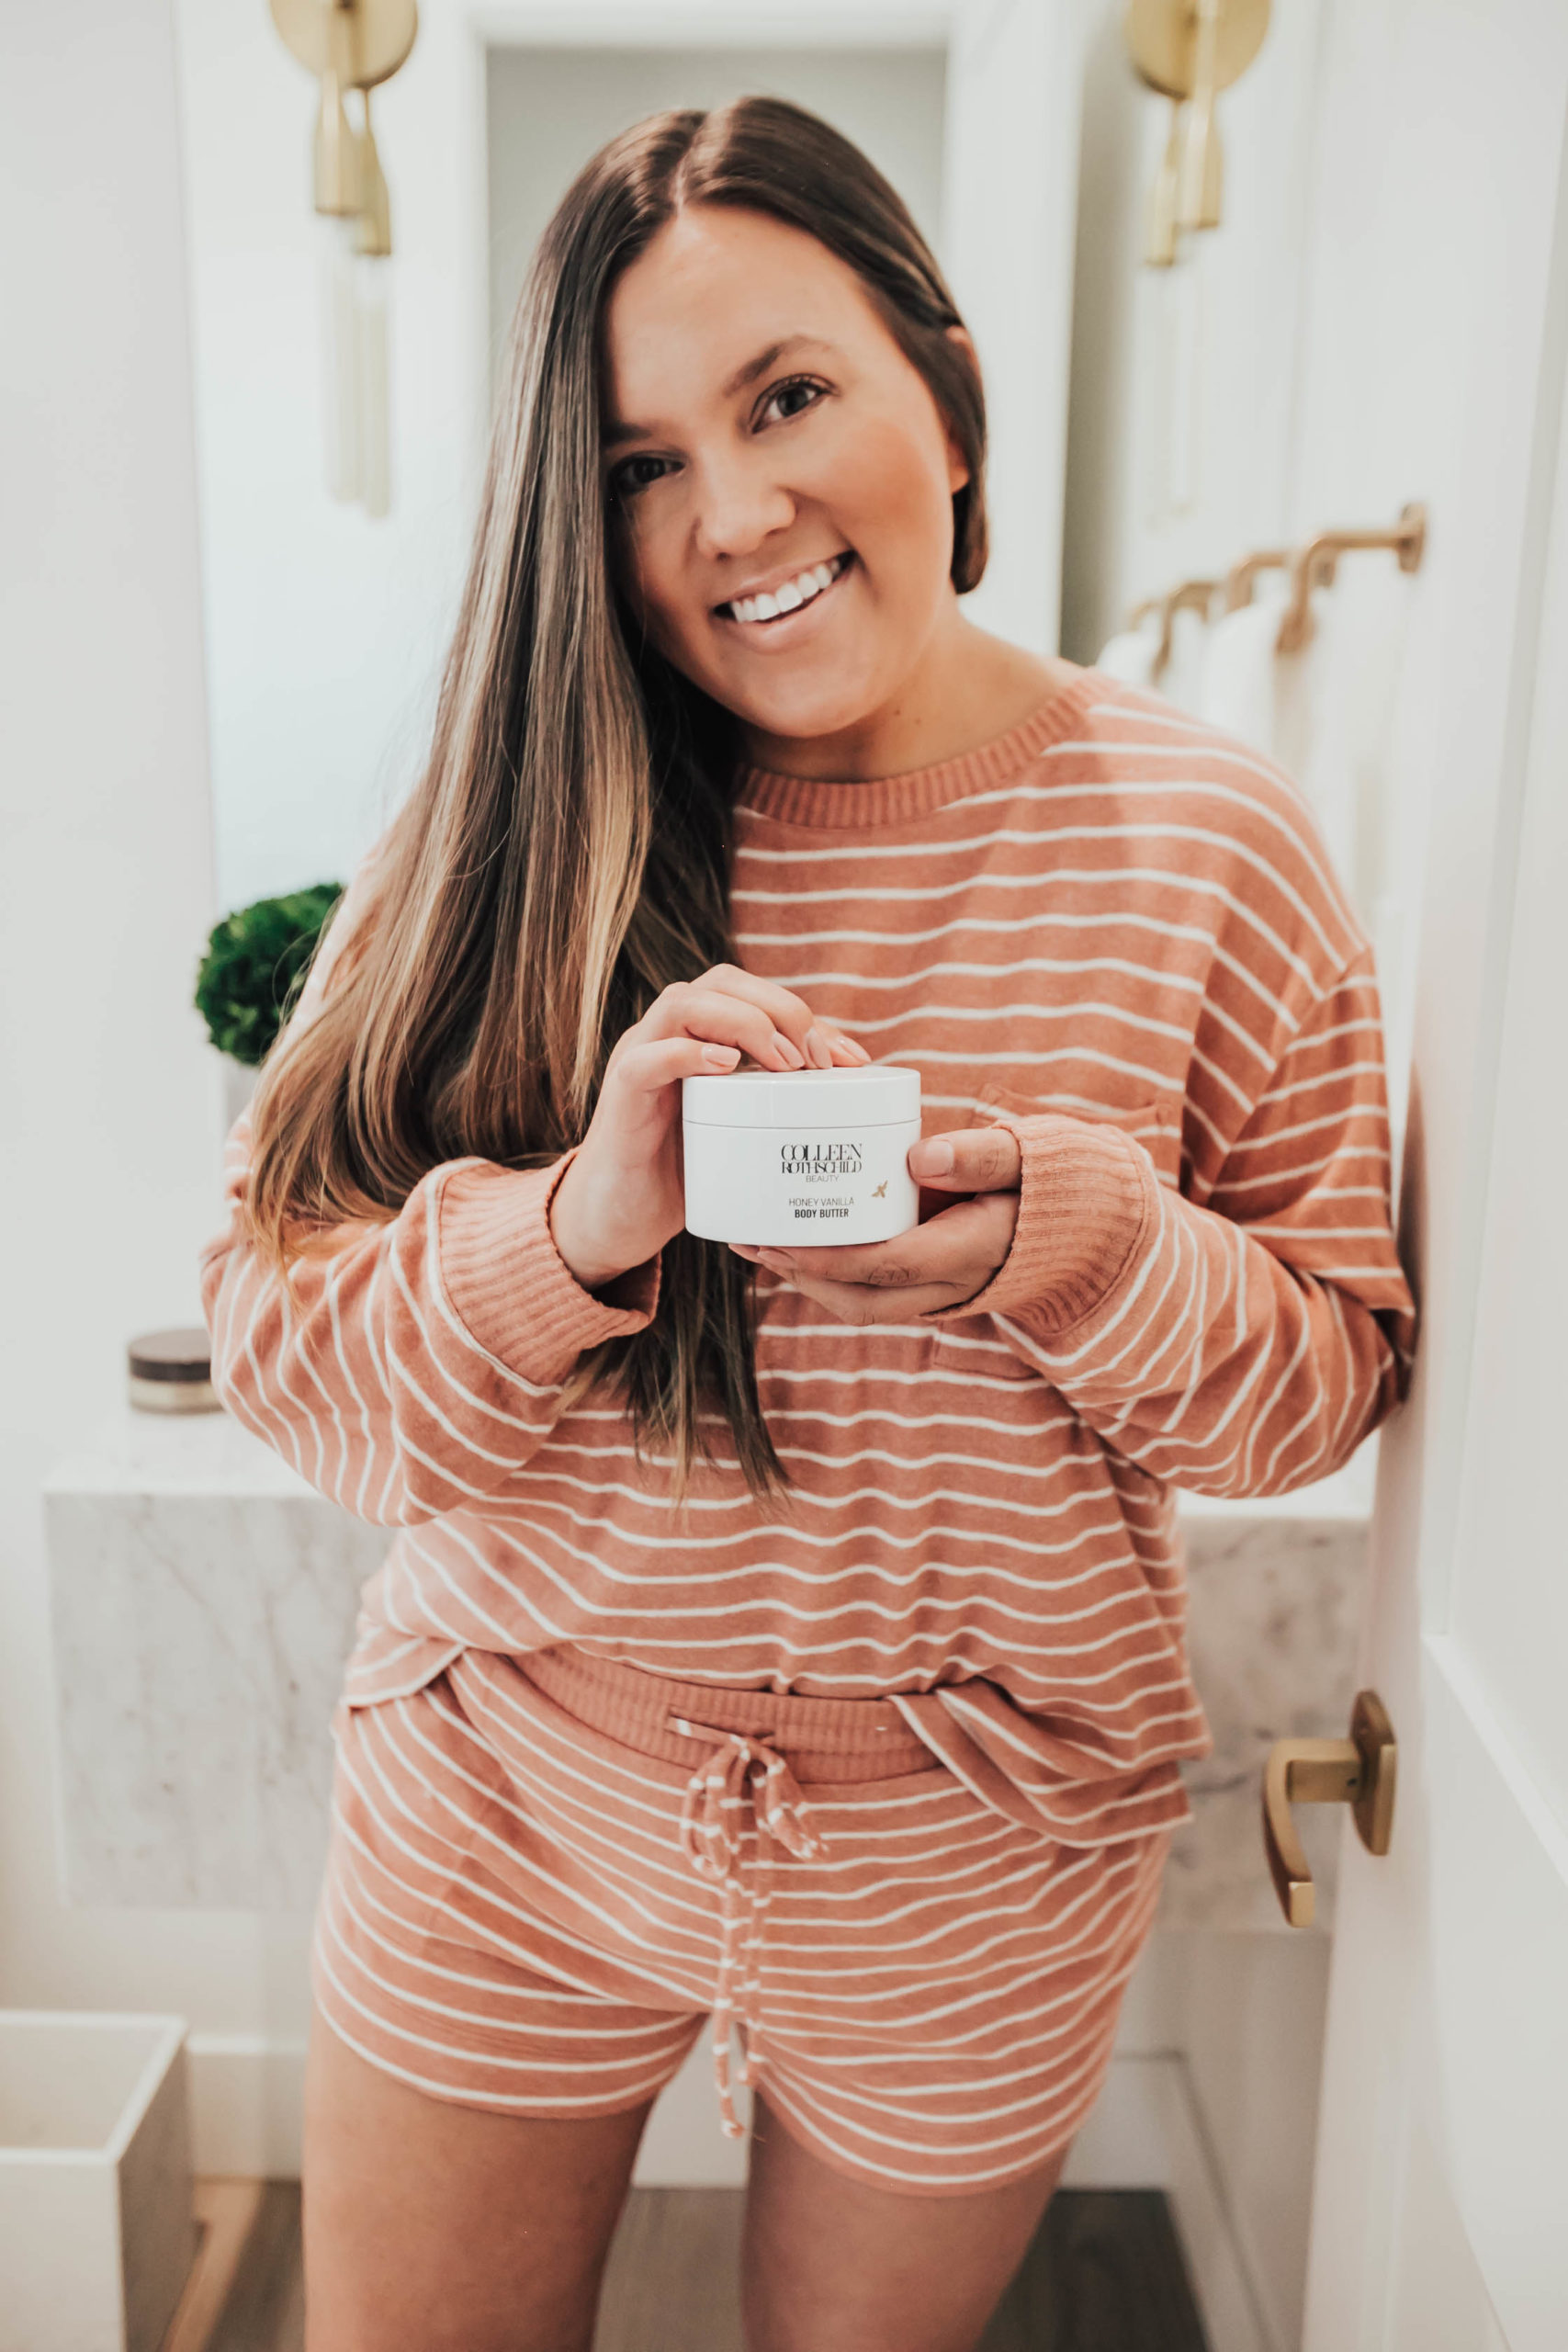 Reno blogger, Ashley Zeal from Two Peas in a Prada shares her favorite Colleen Rothschild Self Care products. They are all currently BOGO 50% off.